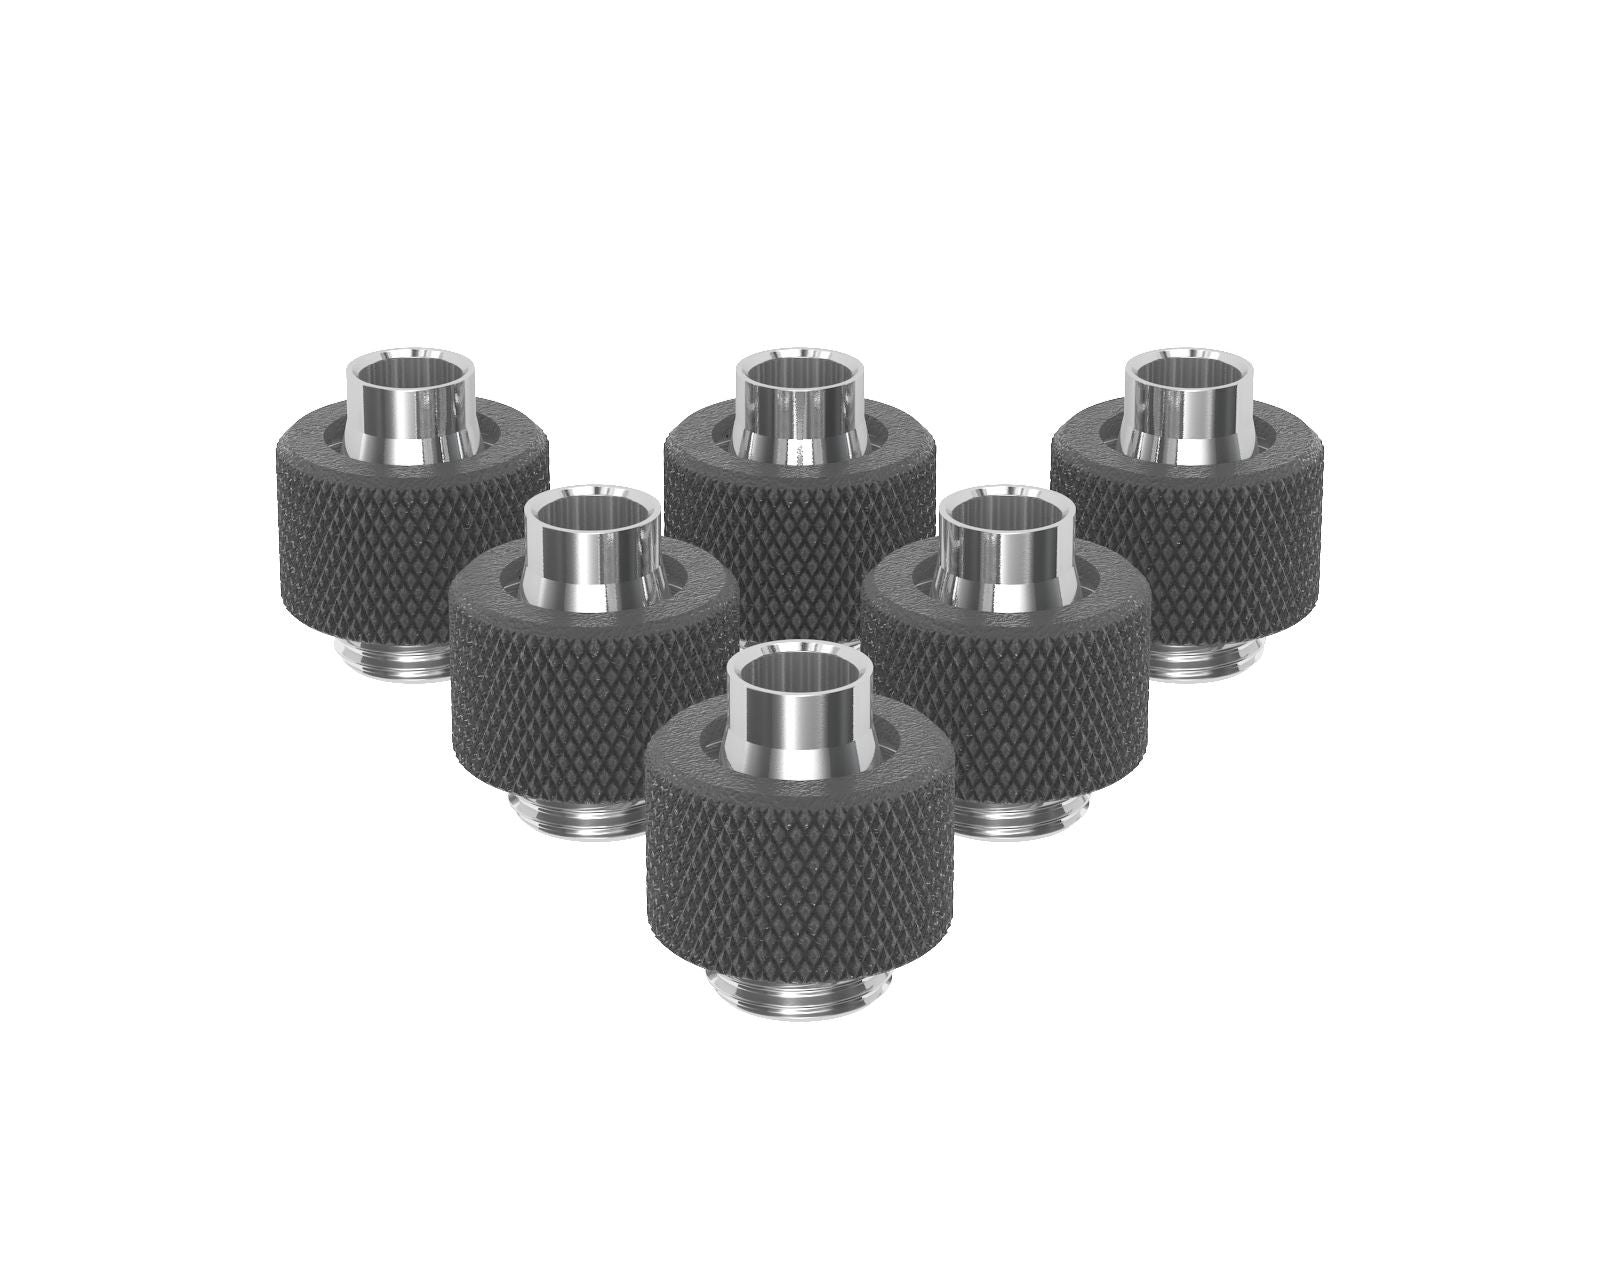 PrimoChill SecureFit SX - Premium Compression Fitting For 3/8in ID x 1/2in OD Flexible Tubing 6 Pack (F-SFSX12-6) - Available in 20+ Colors, Custom Watercooling Loop Ready - TX Matte Gun Metal